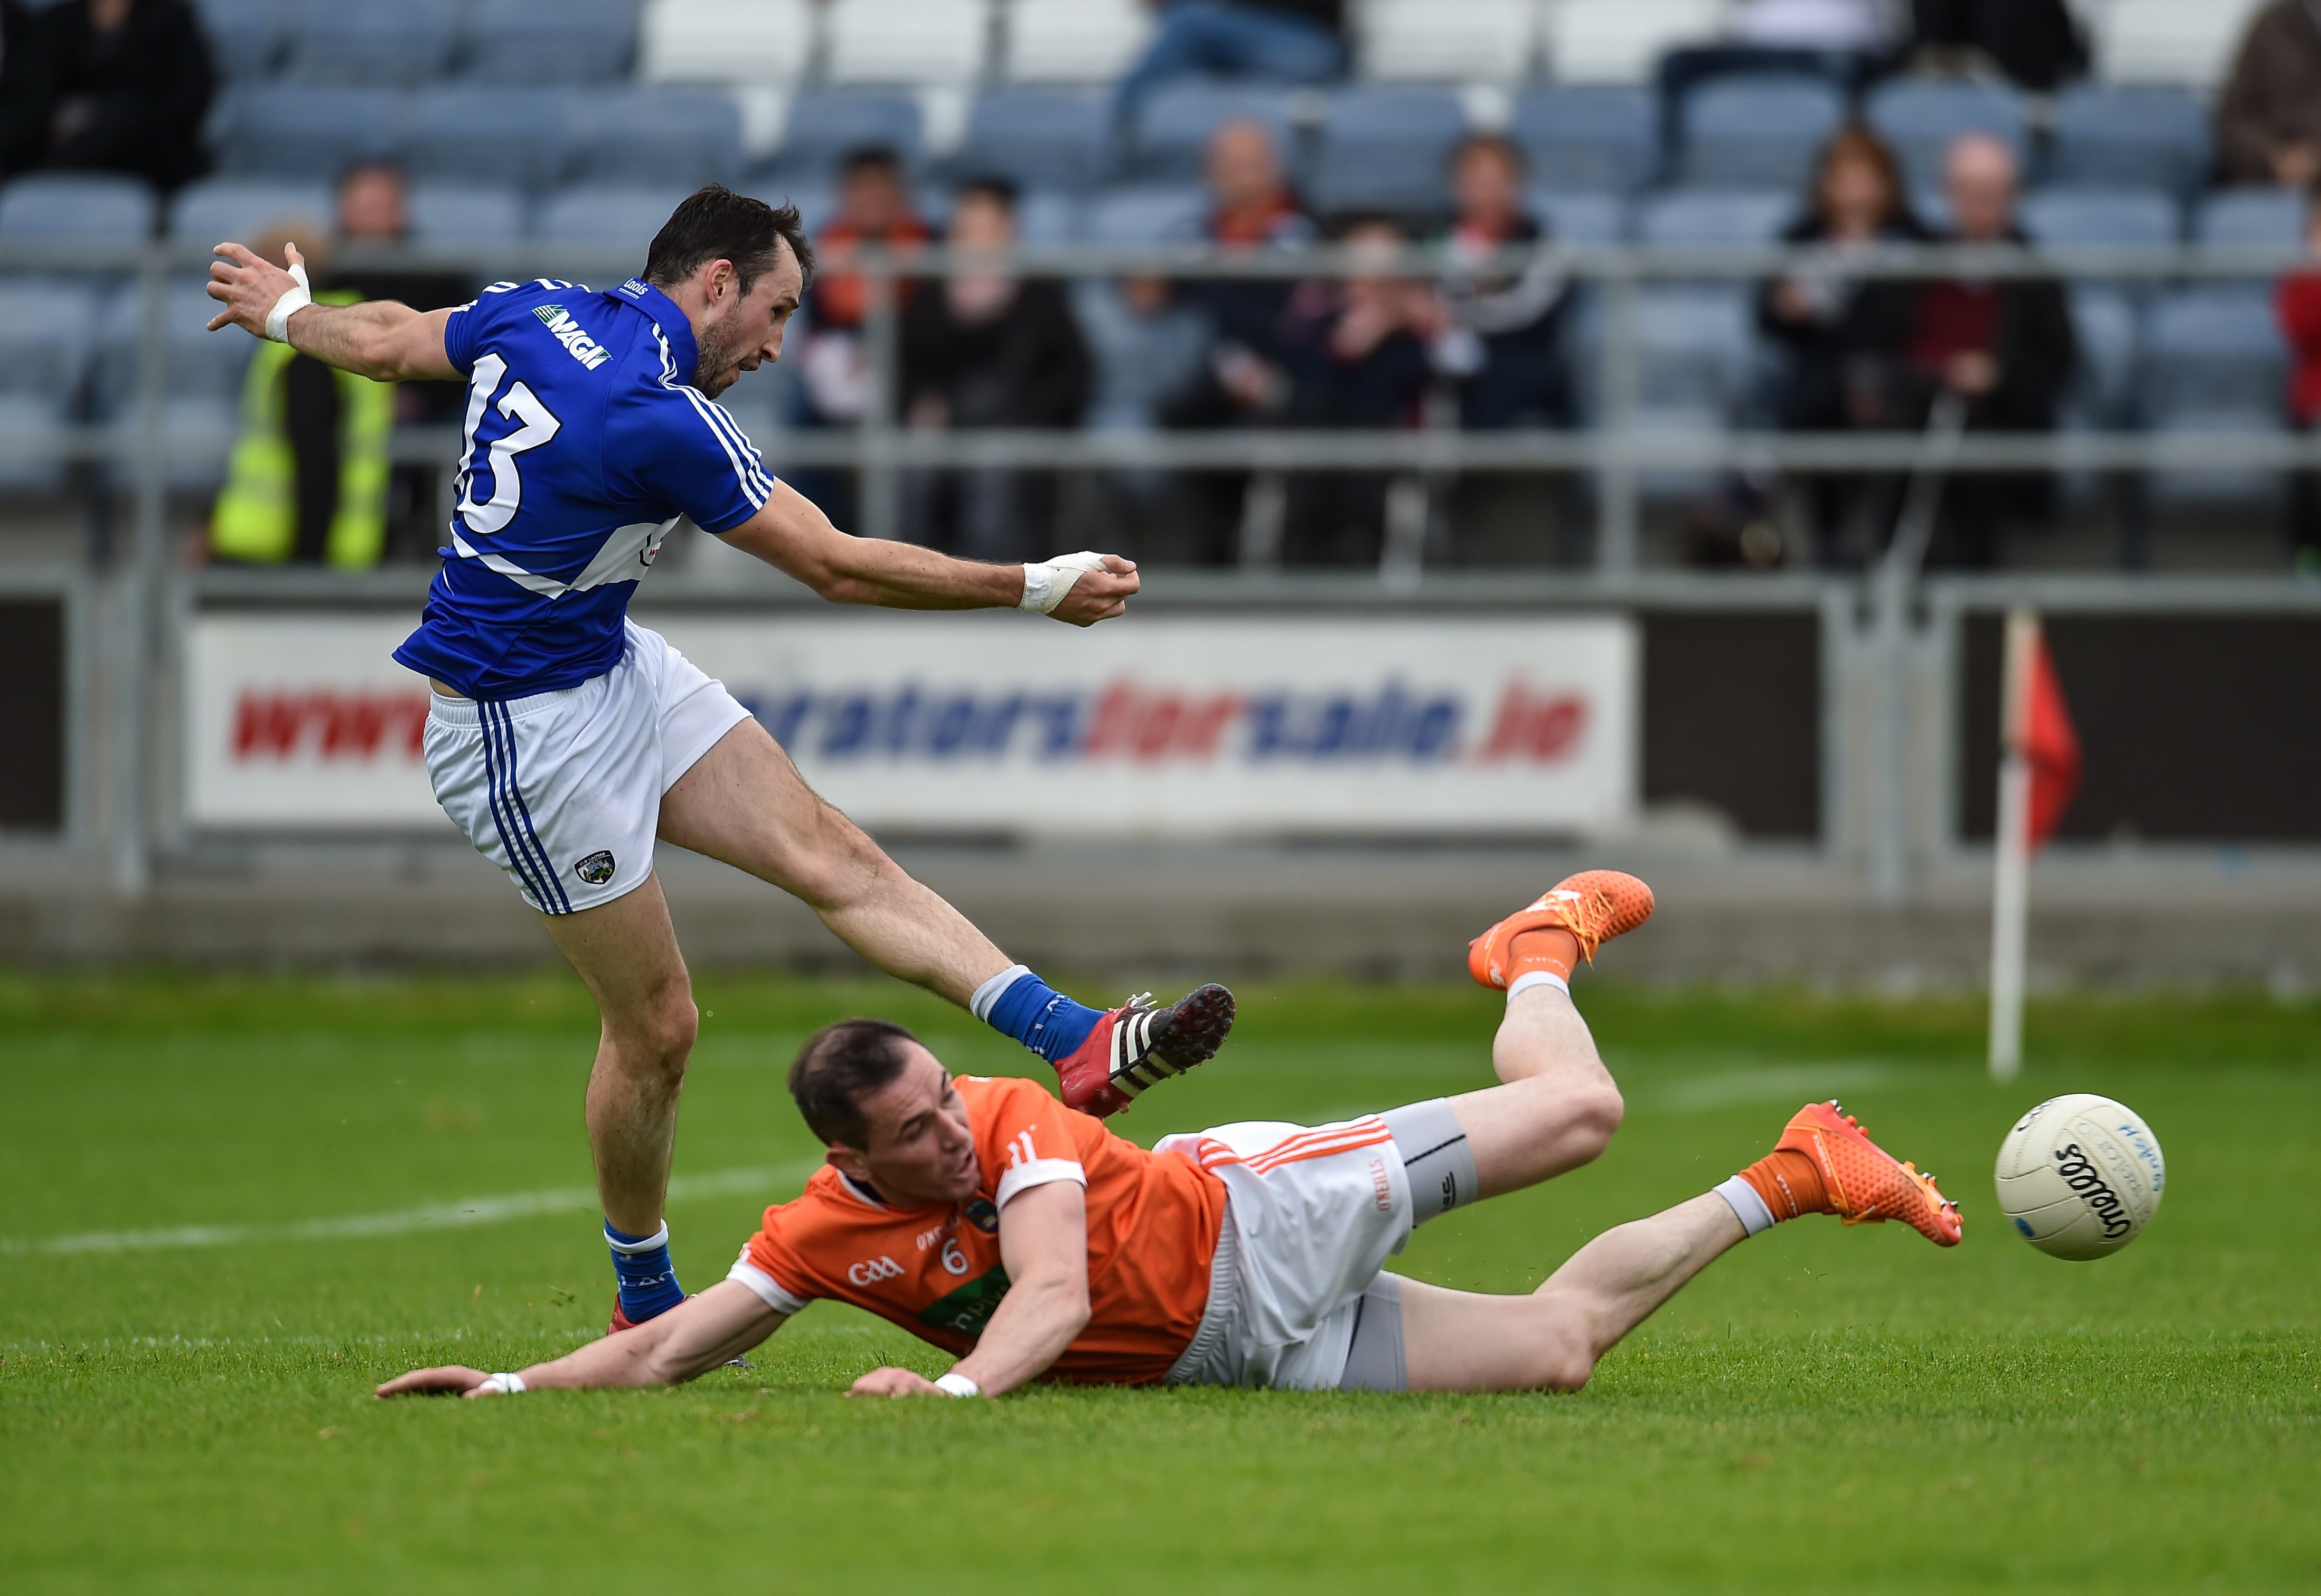 Conor Meredith's wonder goal proved the difference the last time the sides met